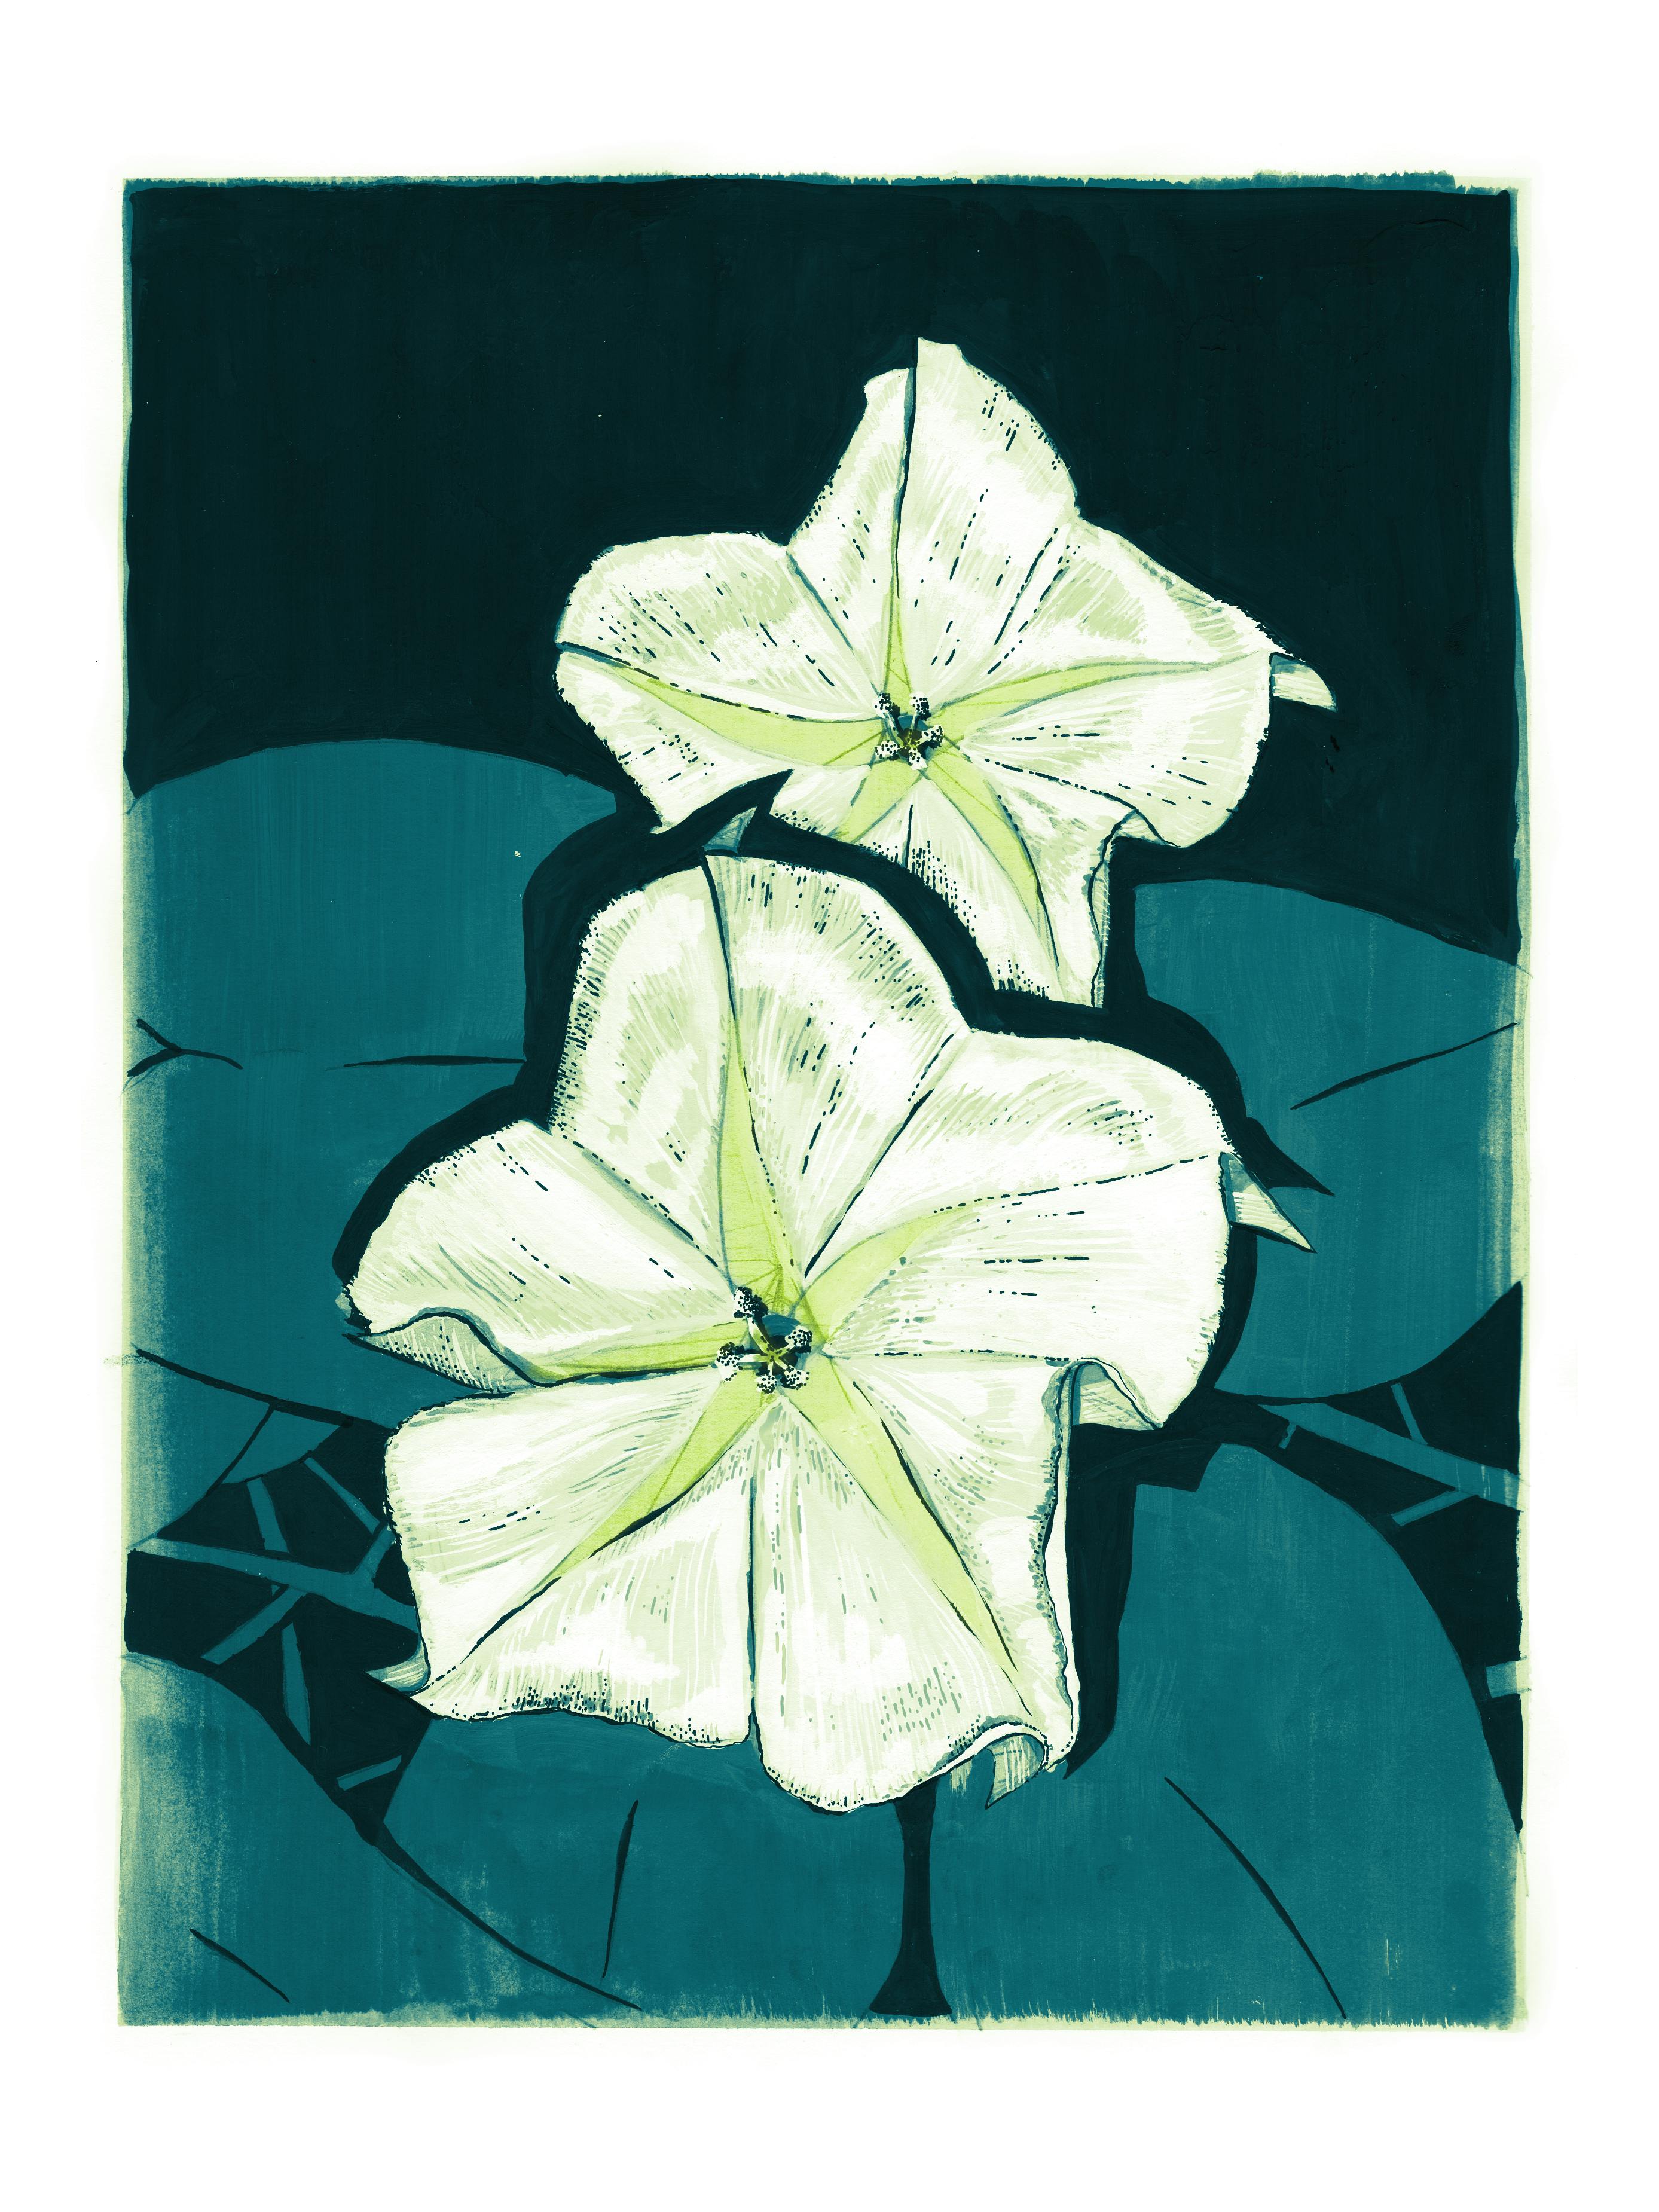 A digitally-toned version of the moonflower drawing